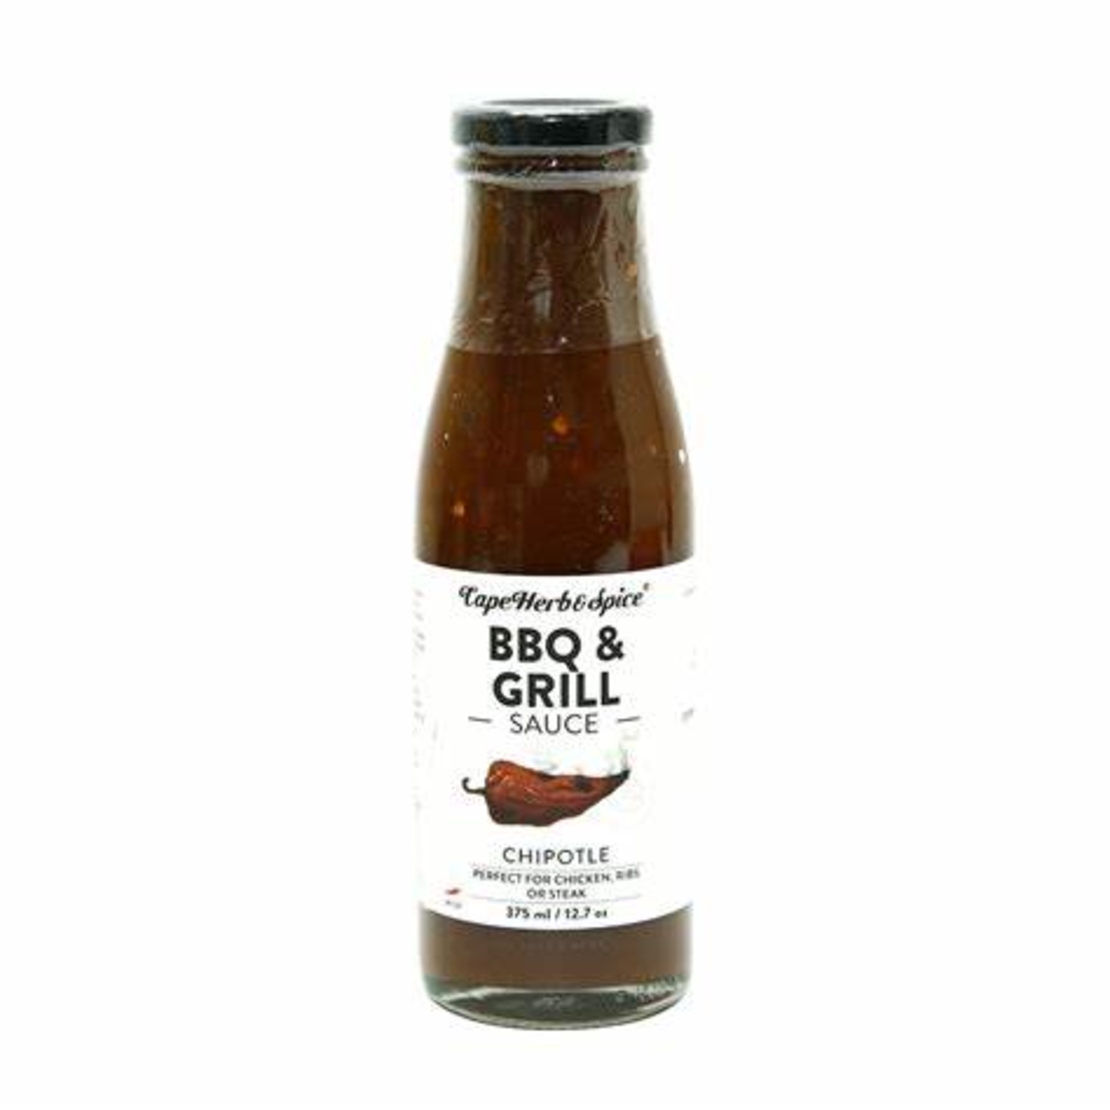 Cape Herb & Spice BBQ and Grill Chipotle Mild 375 ml